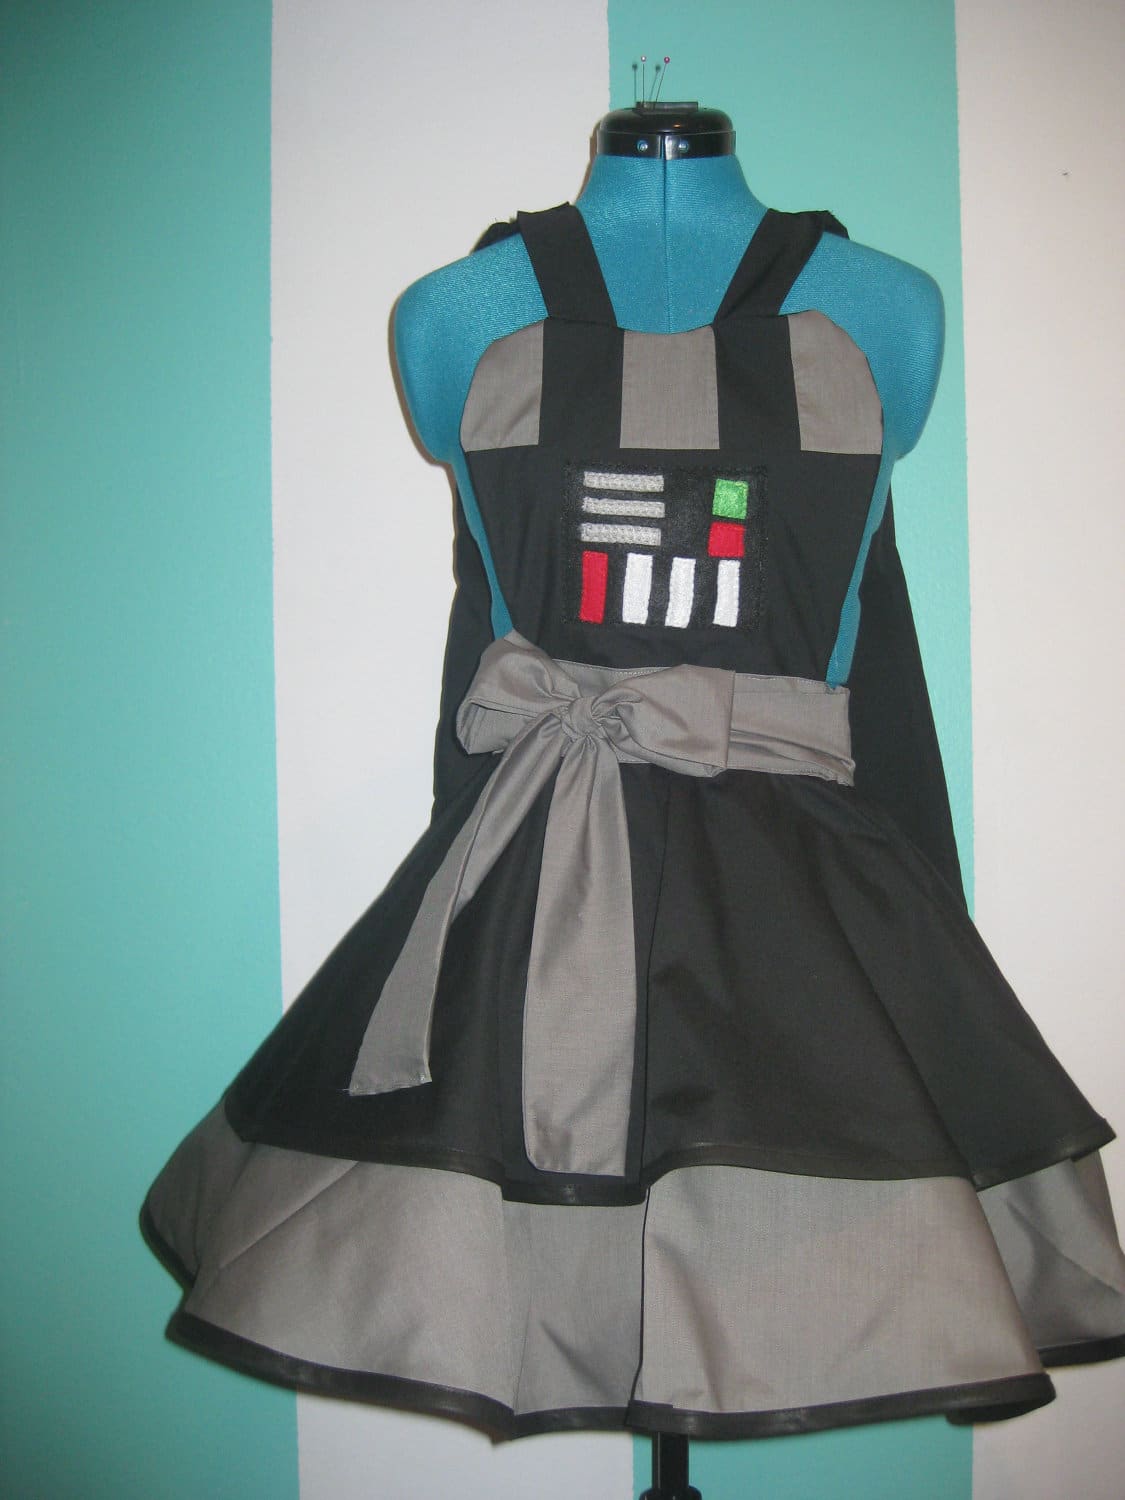 Darth Vader Apron Pinafore Will Make You The Ruler Of All